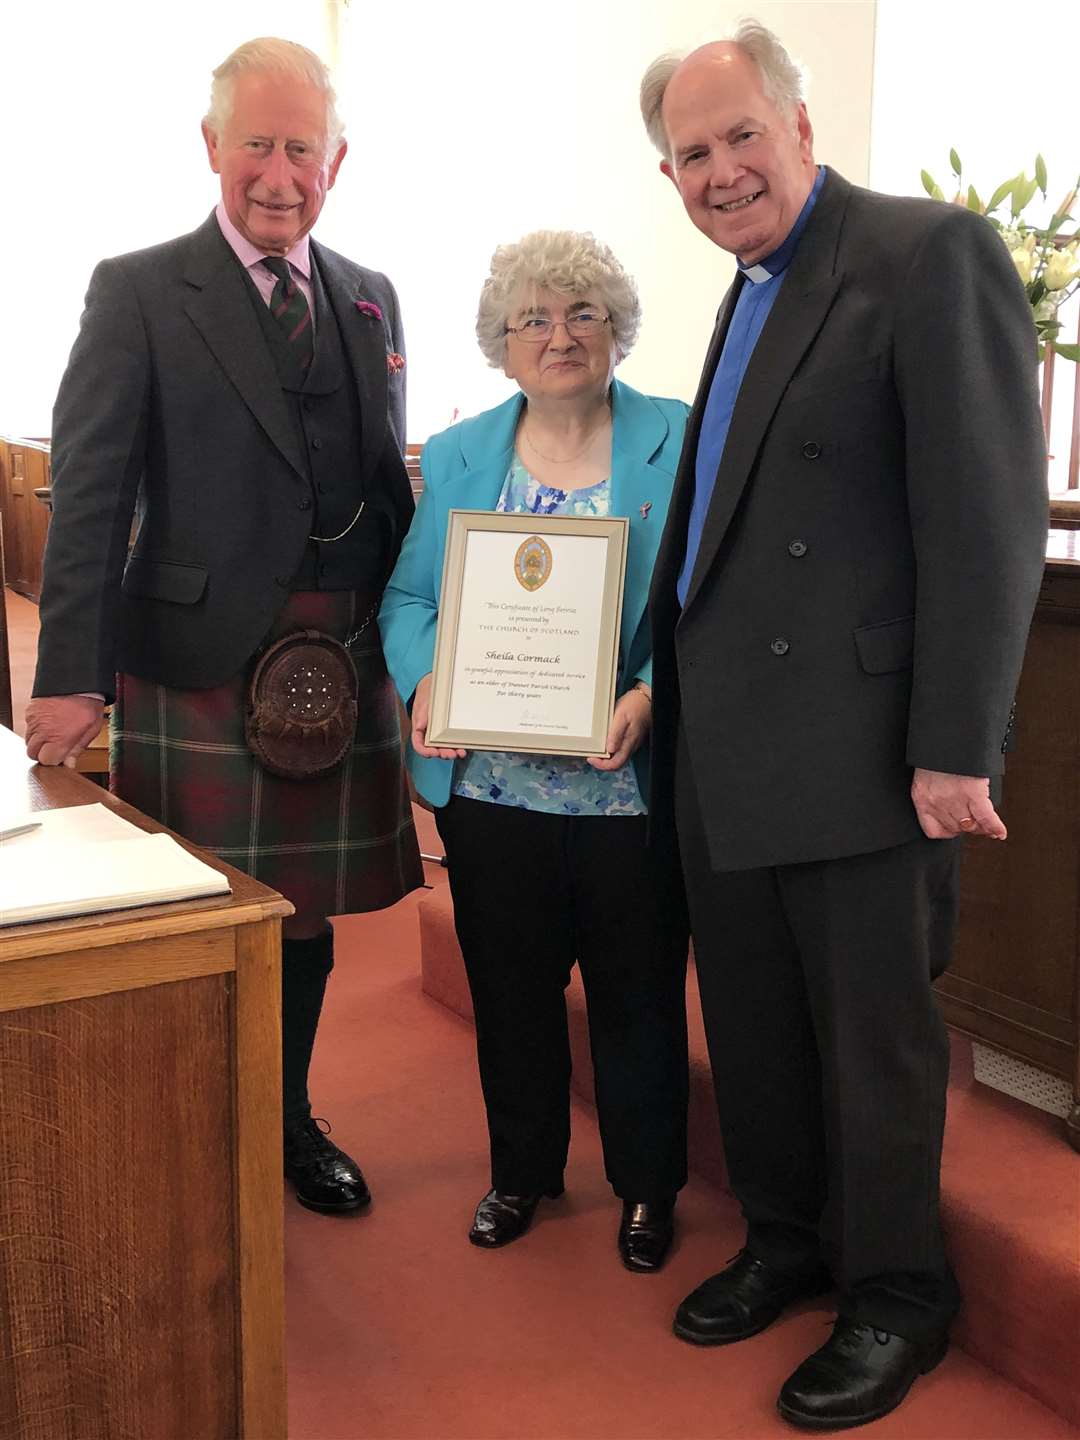 Sheila Cormack holding her long service certificate at Dunnet Church along with Prince Charles, the Duke of Rothesay, and the Rev Lyall Rennie.